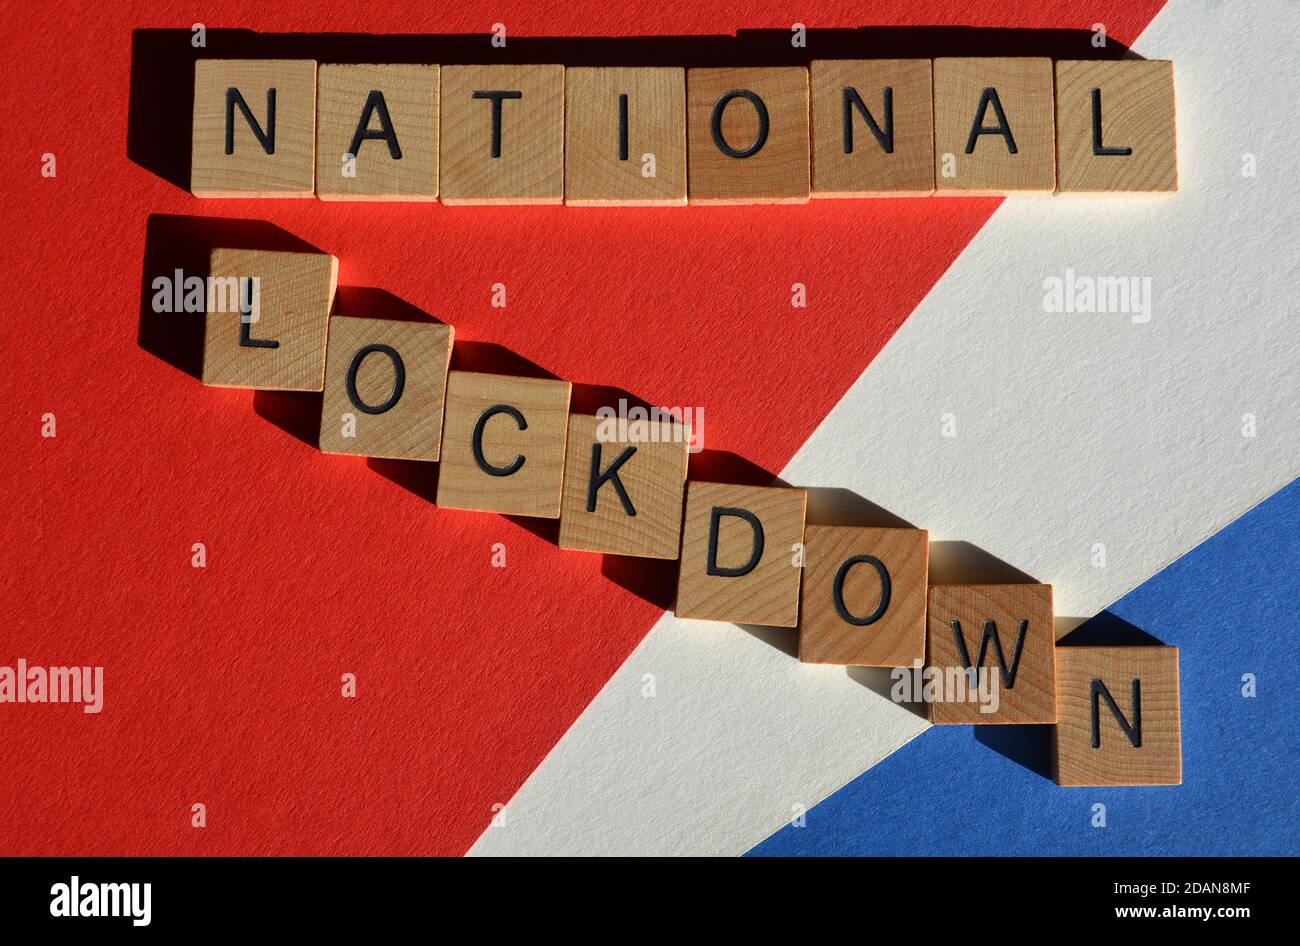 National :ockdown, words in wooden alphabet letters on red, white and blue background Stock Photo